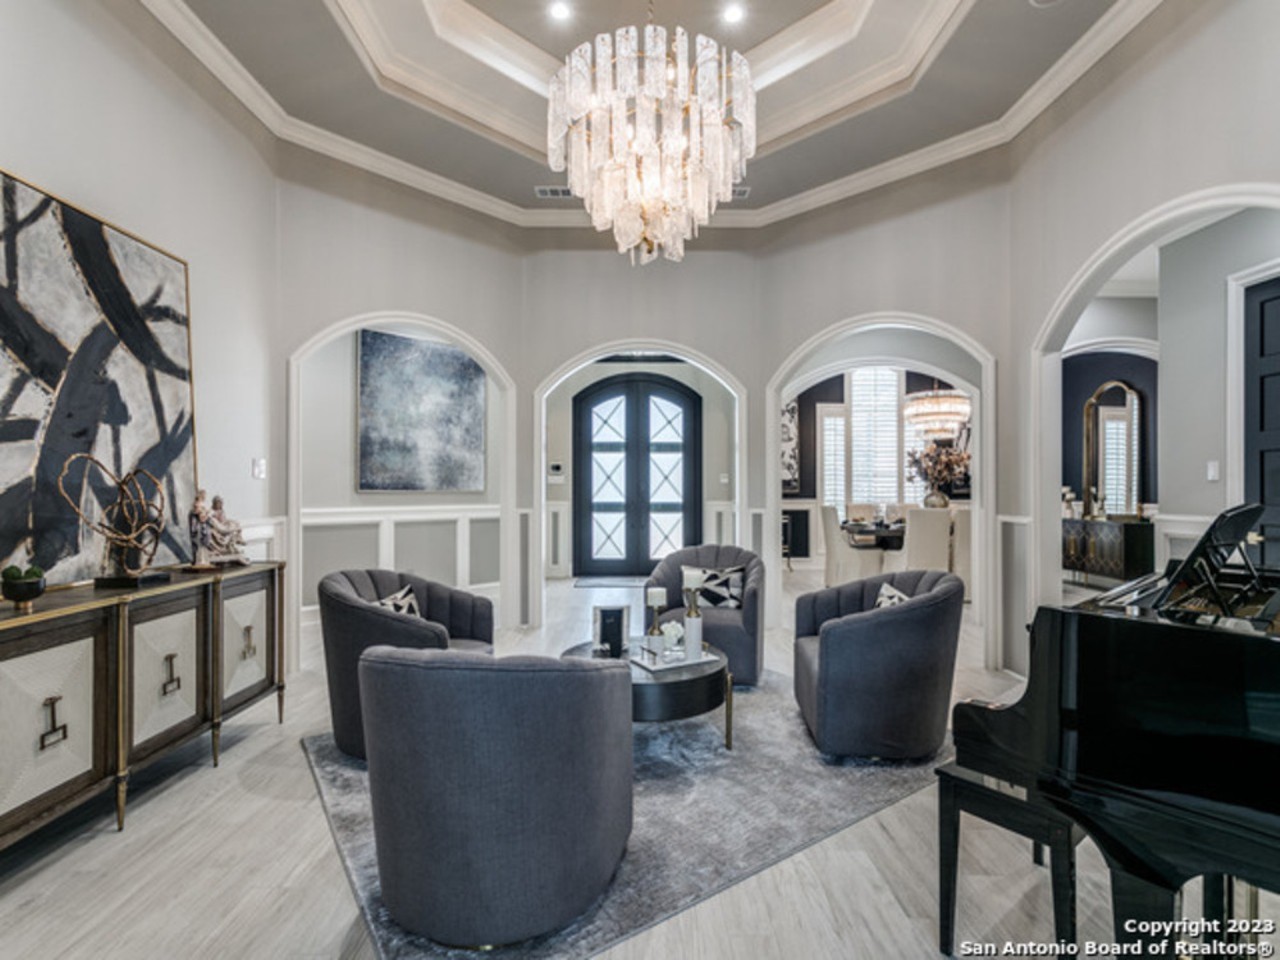 This San Antonio mansion for sale has a media room with its own speakeasy bar